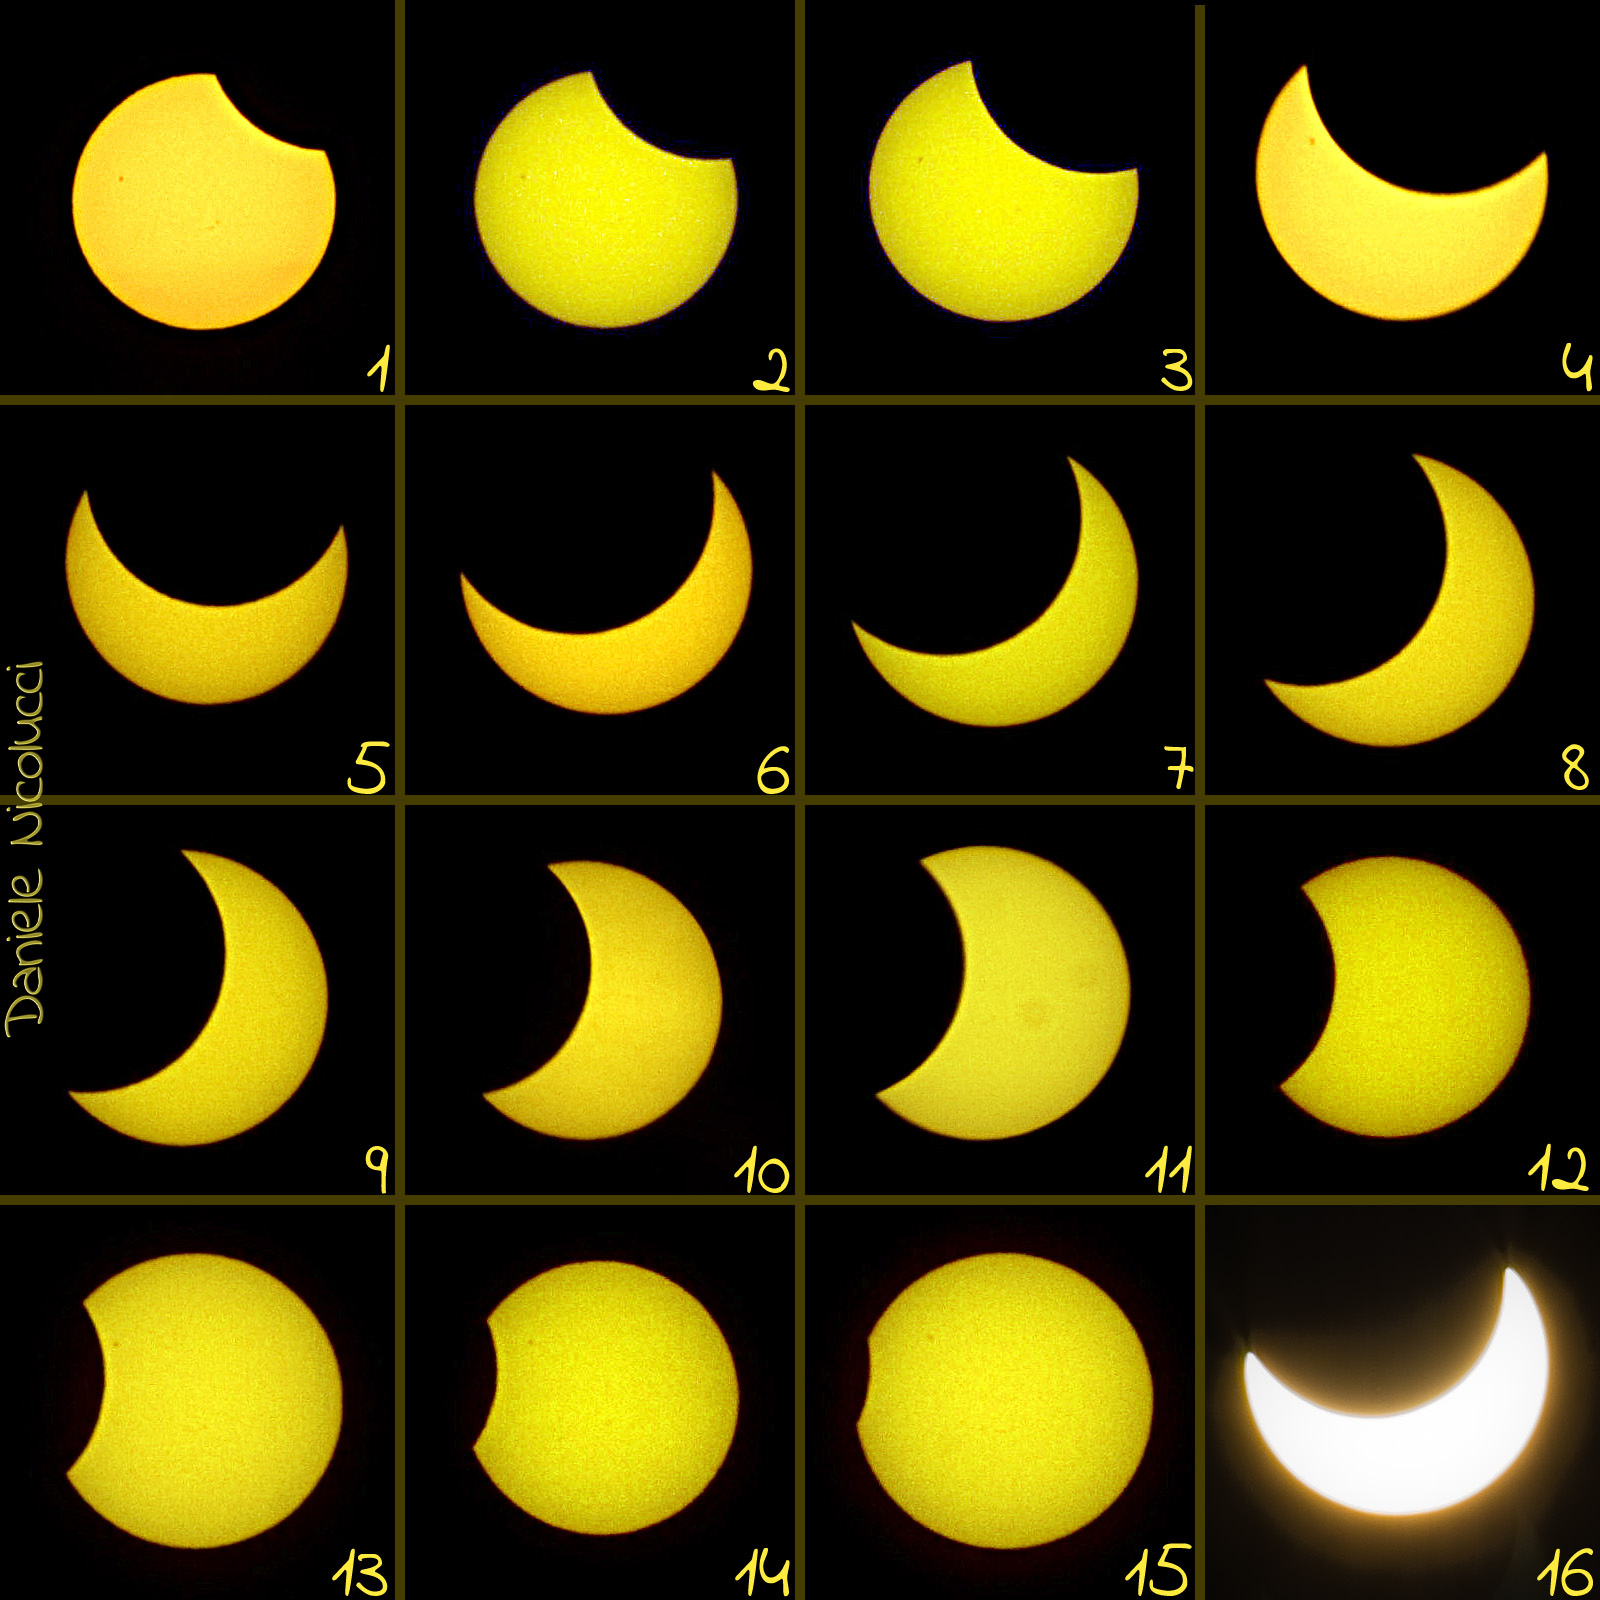 4 easy eclipse activities for North and South America